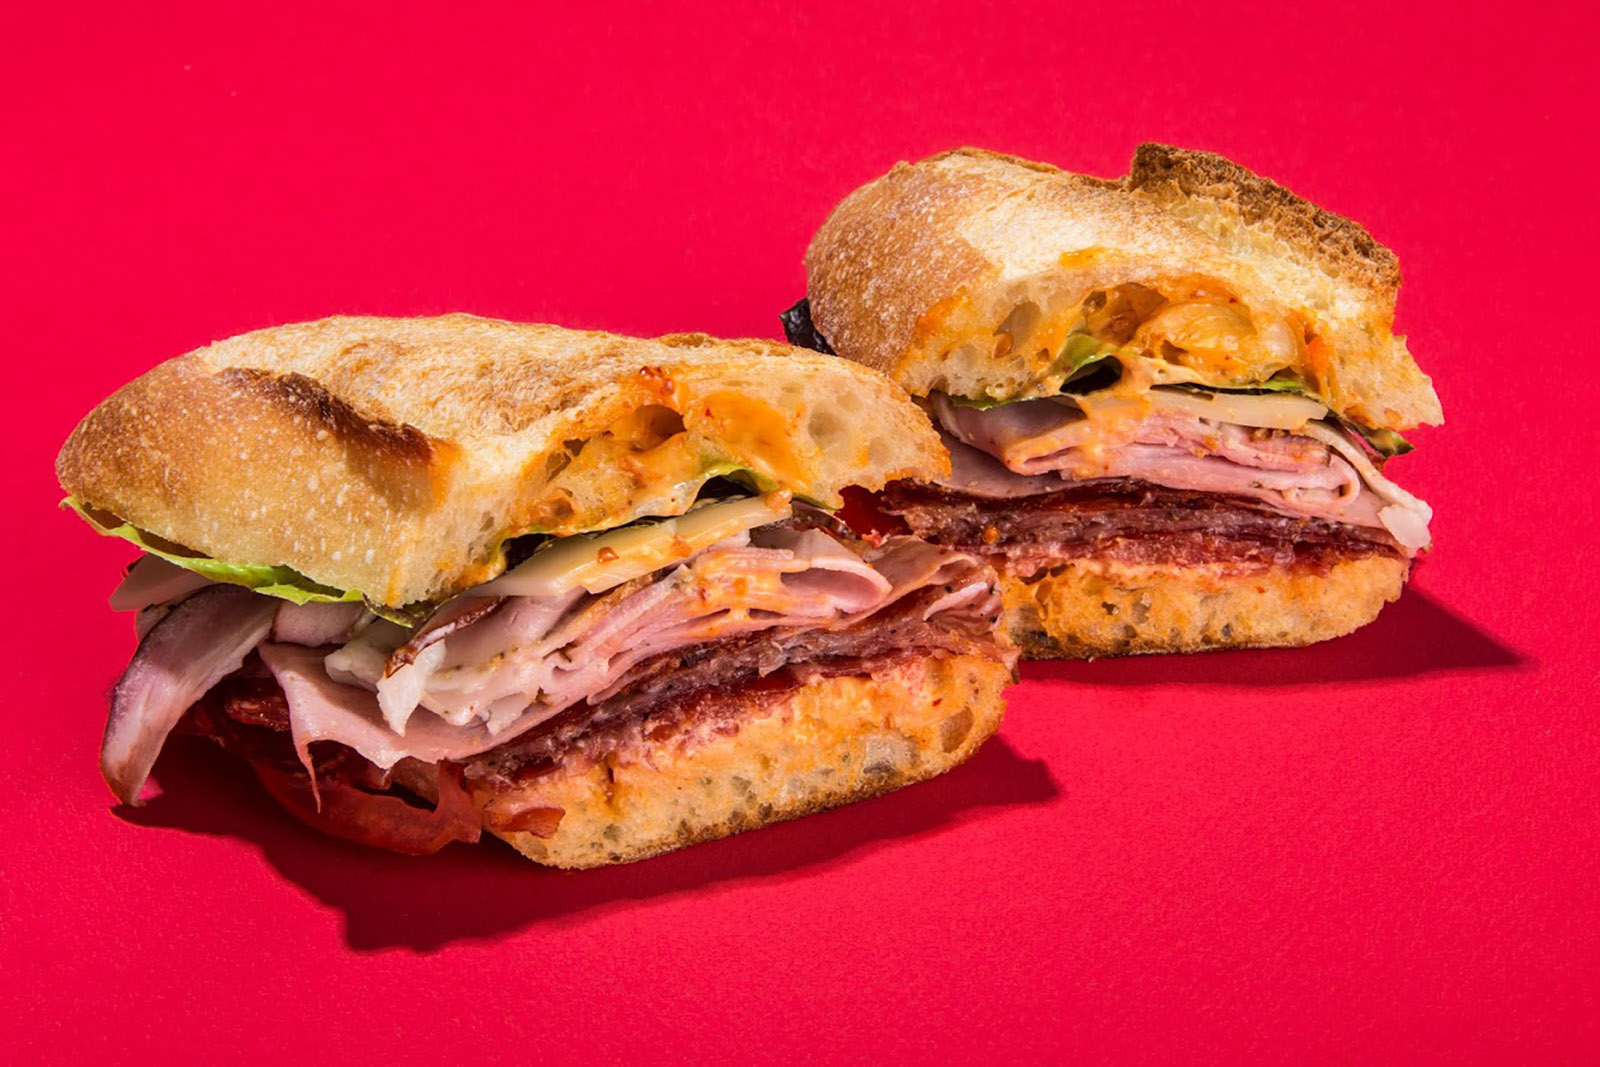 A sandwich filled with Italian meats, lettuce, and cheese in a baguette against a bright red background.